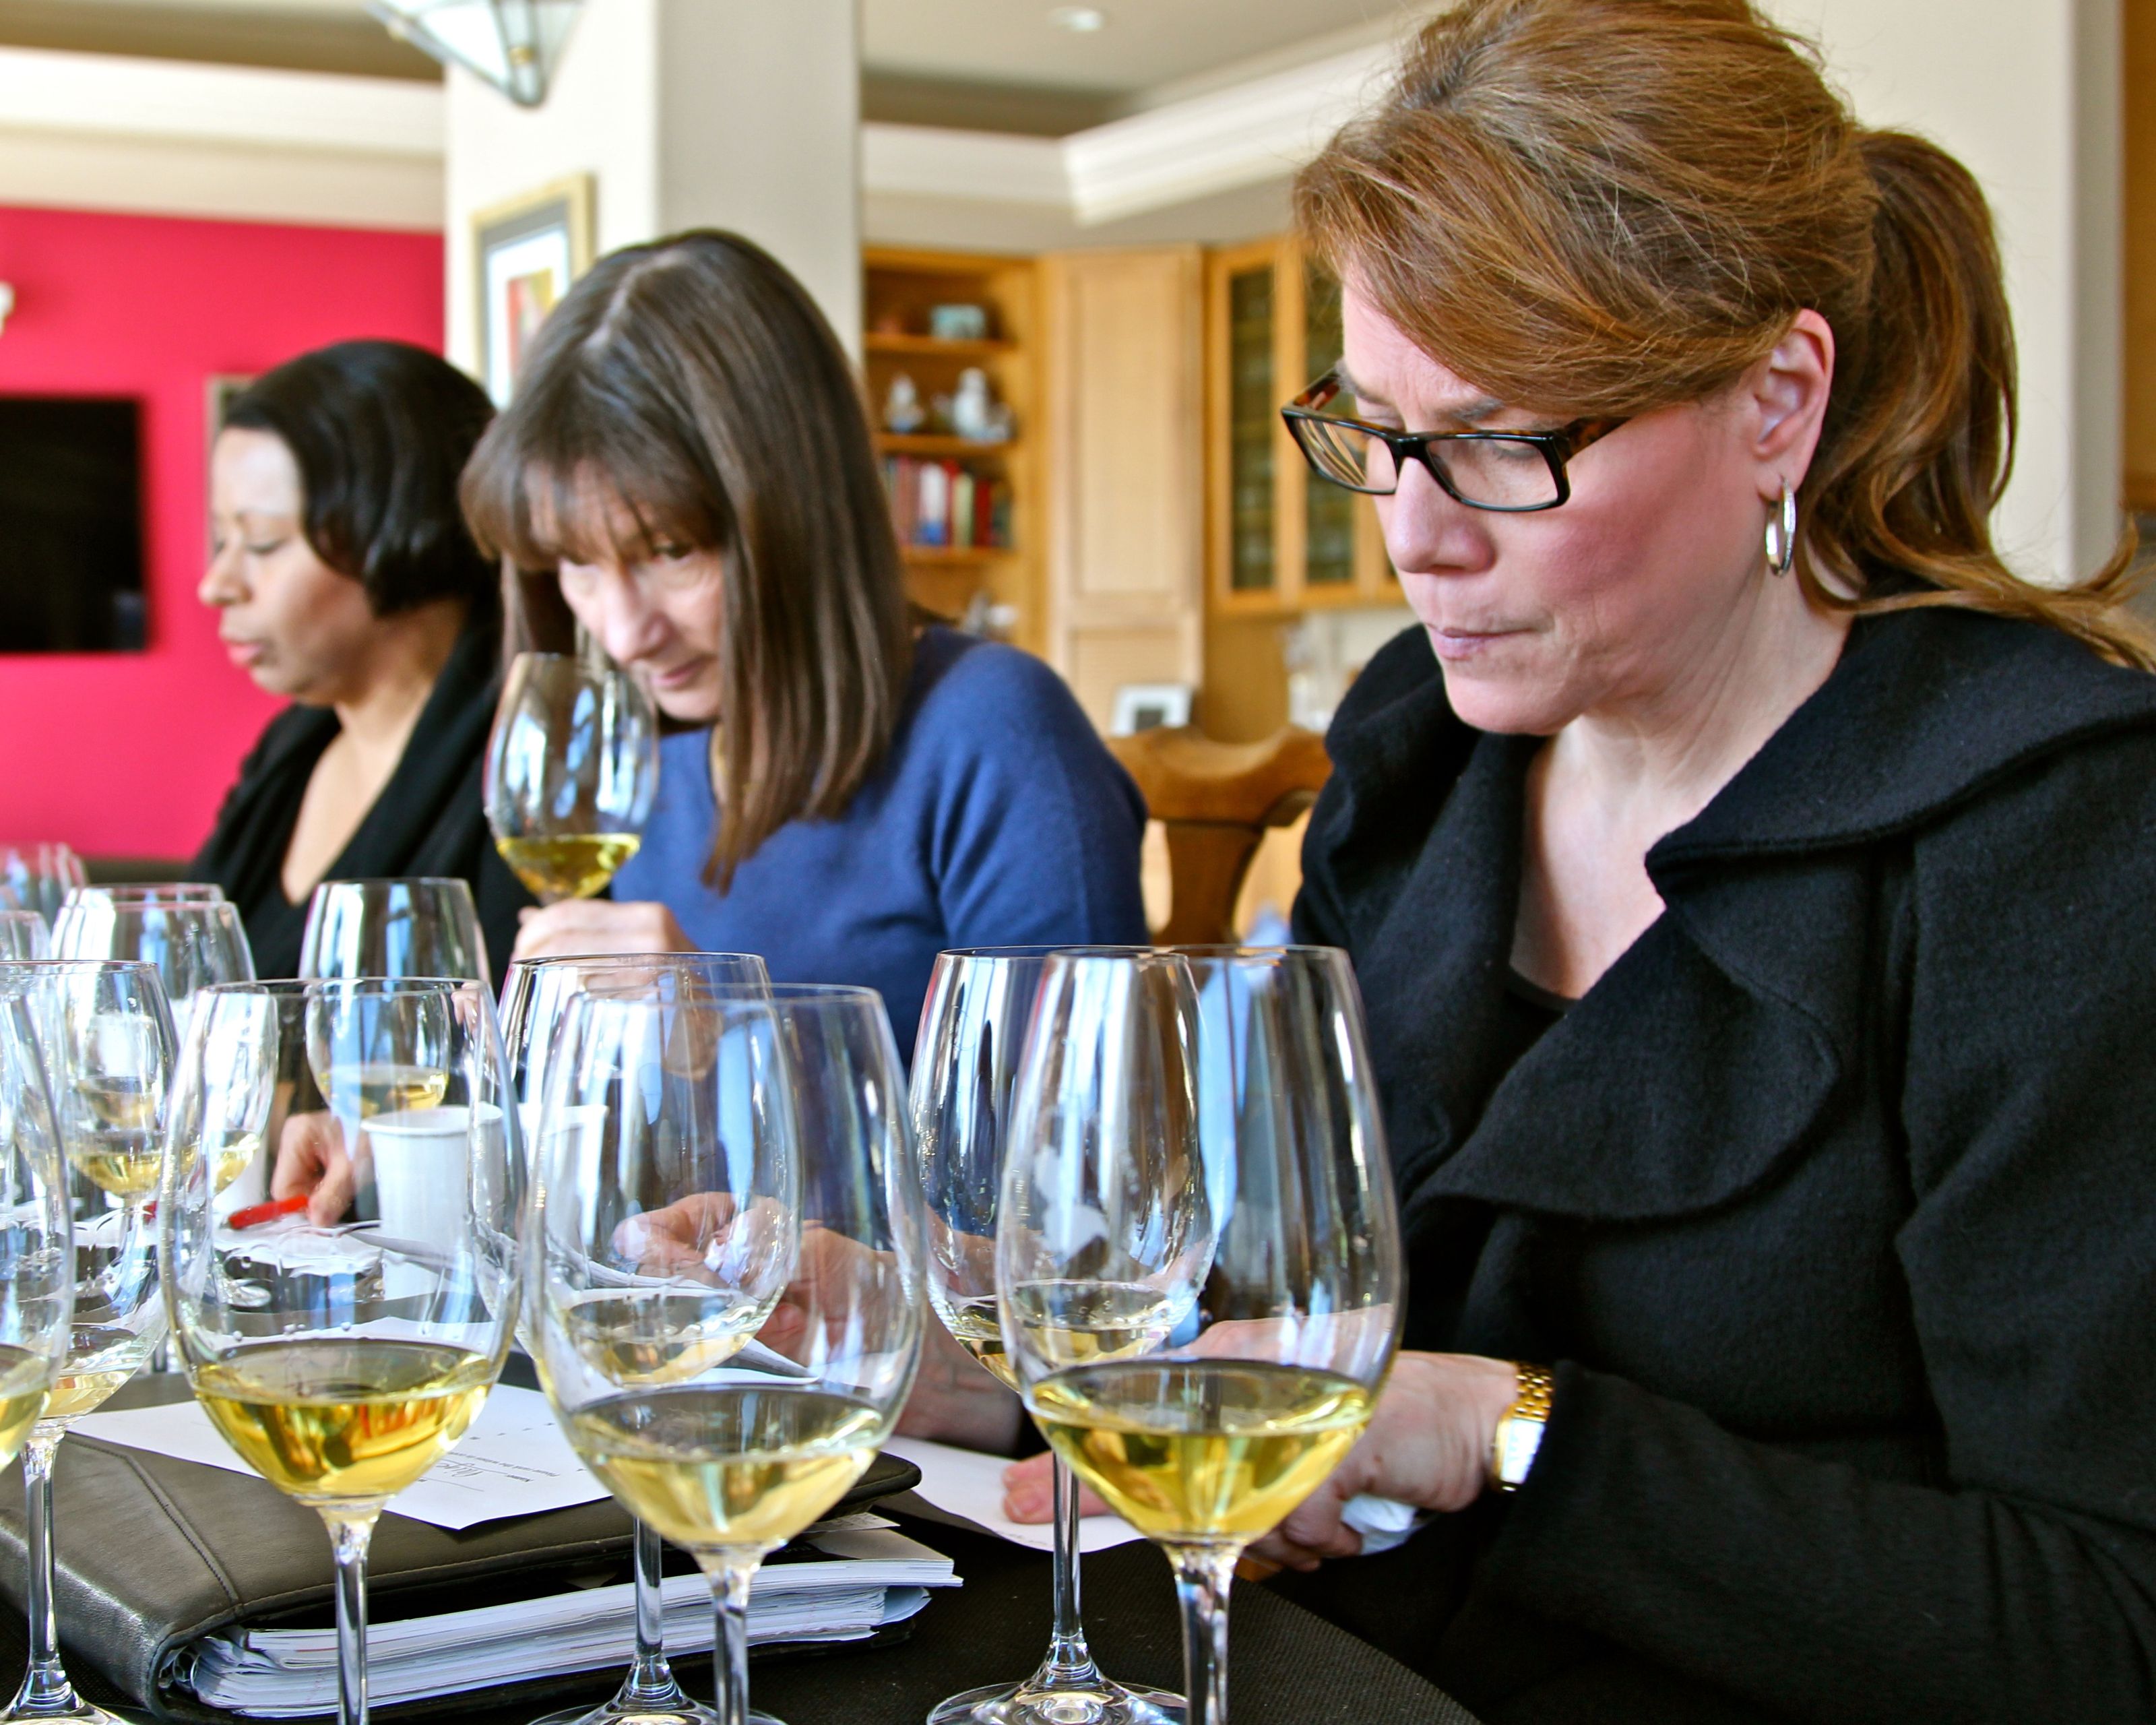 Sommeliers Cassandra Brown, Ellen Landis and Paige Bindel evaluating Chardonnays crafted from Wente selections and clones.